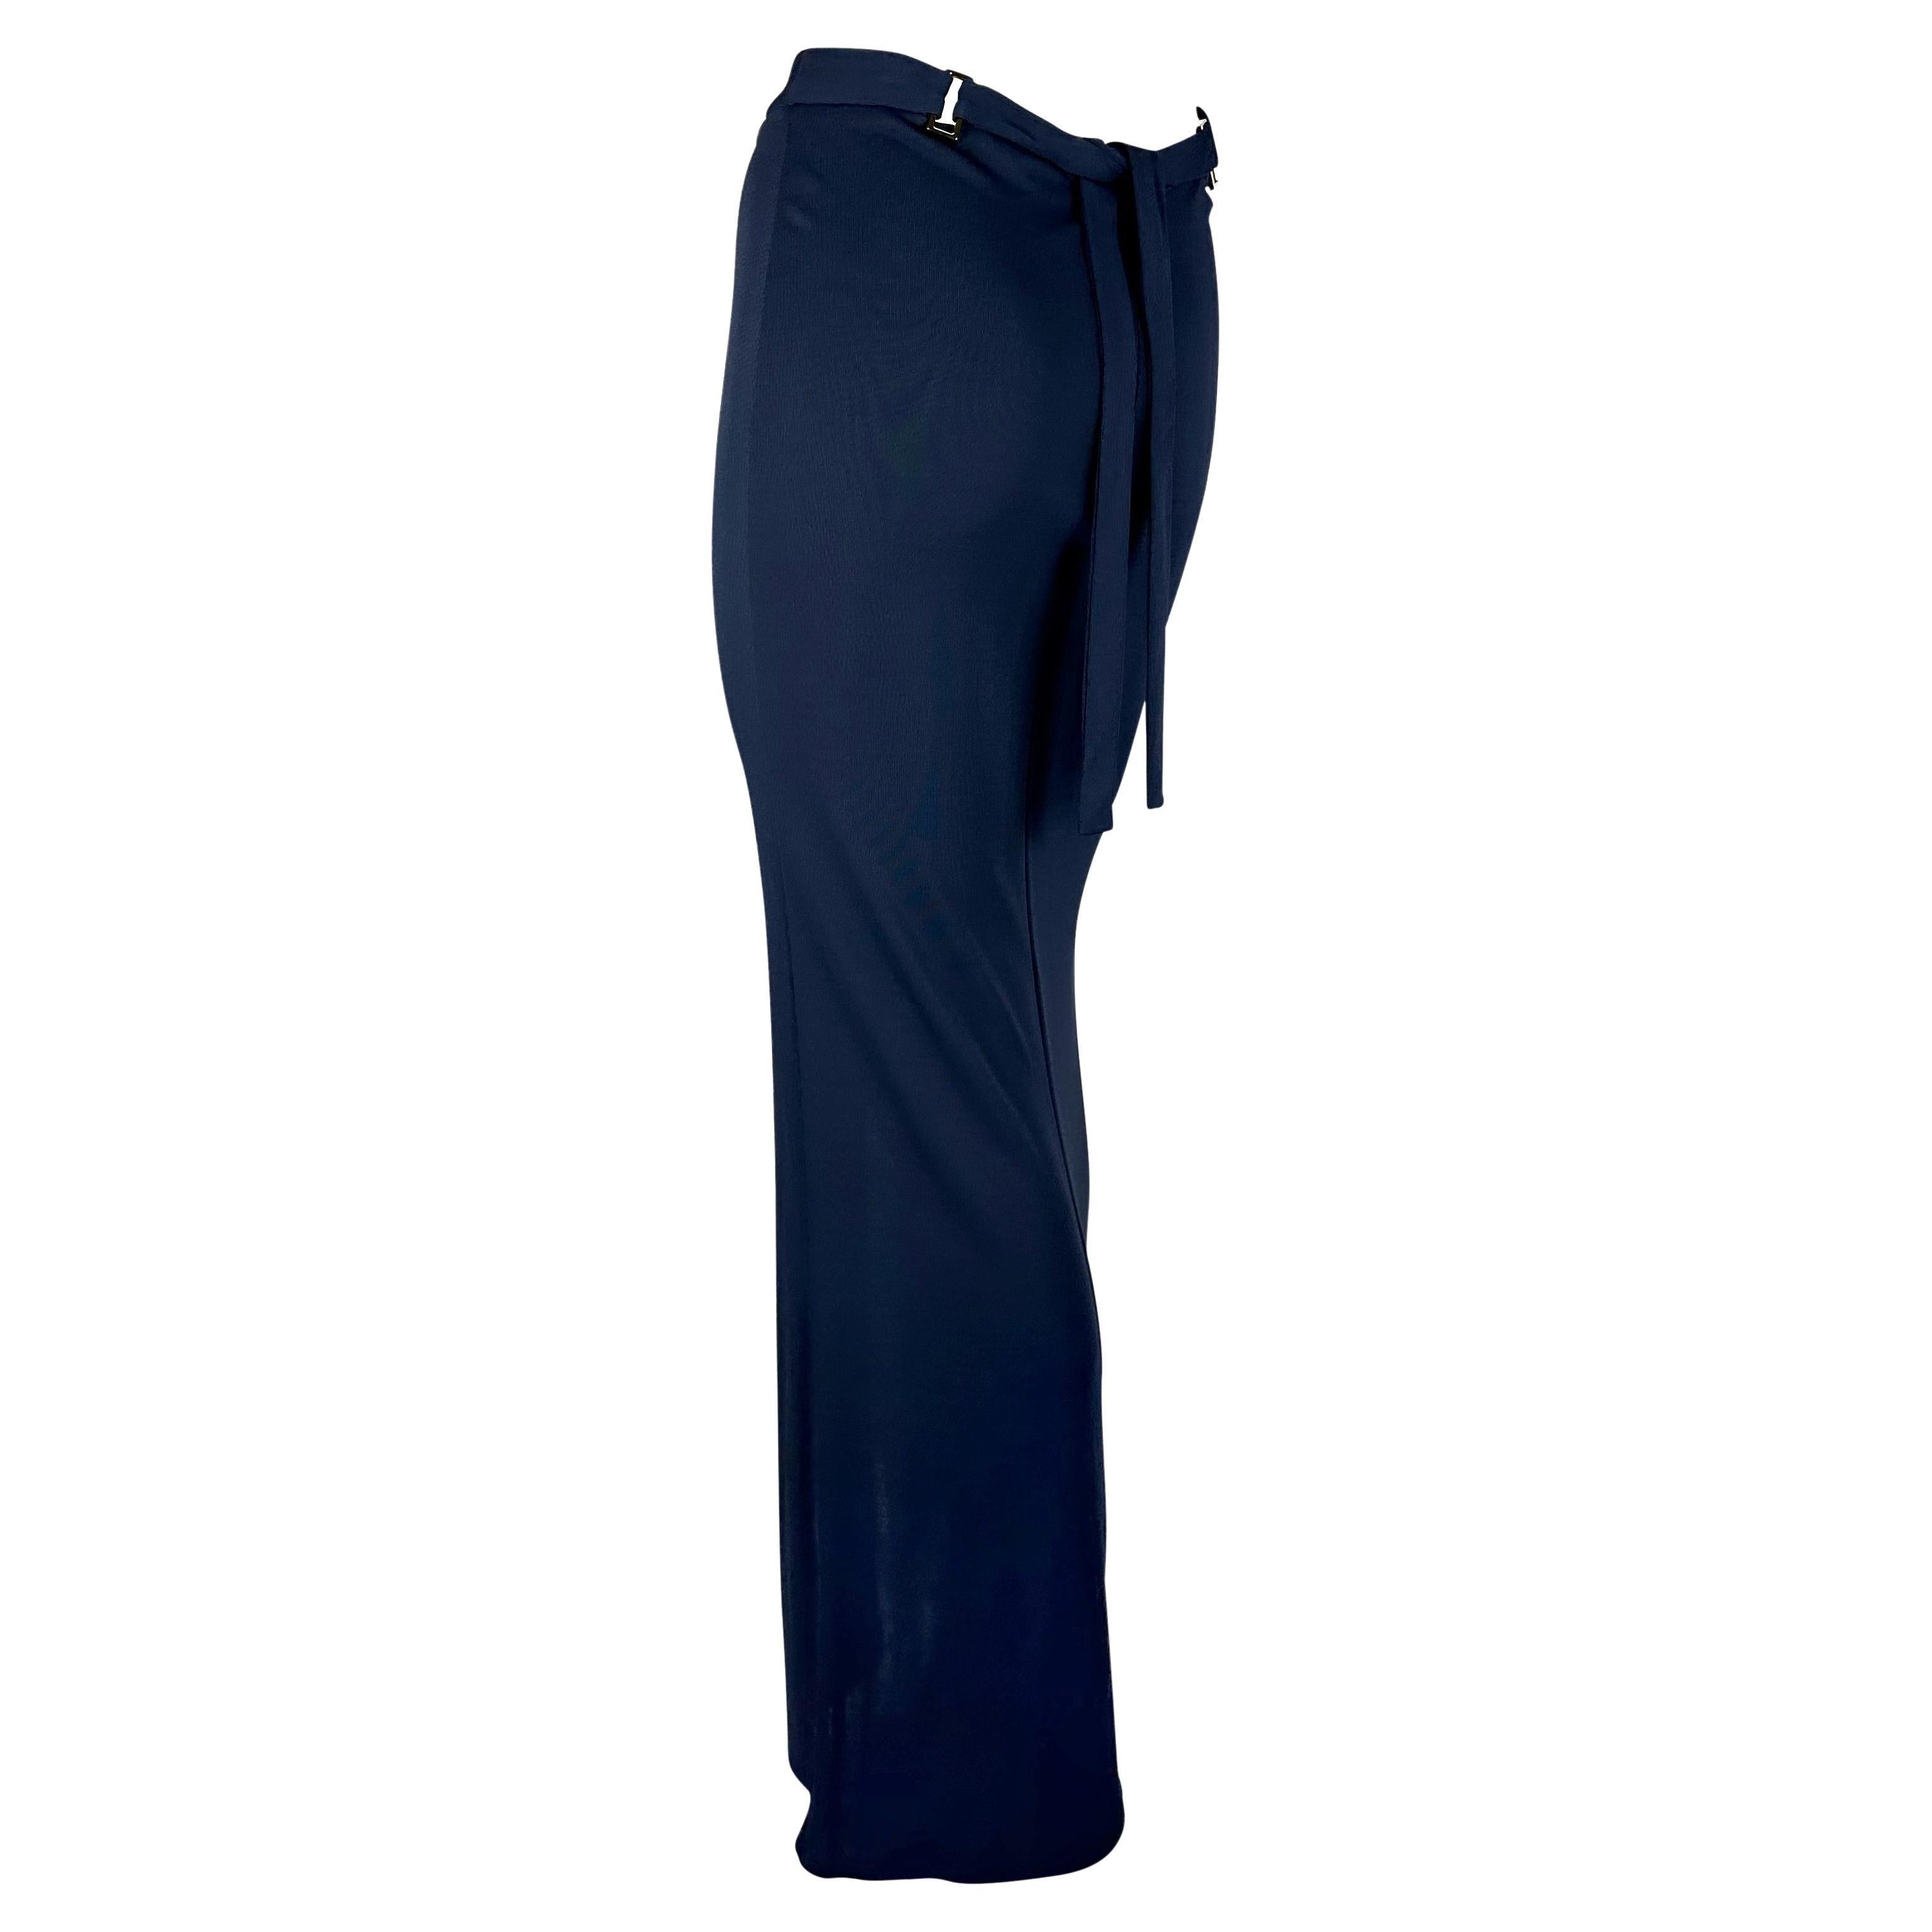 Presenting an incredible navy Gucci maxi skirt, designed by Tom Ford. From the Spring/Summer 1997, this rare sample skirt never made it to being mass produced. The skirt features a slit in the front and is made complete with a tie and gold-tone